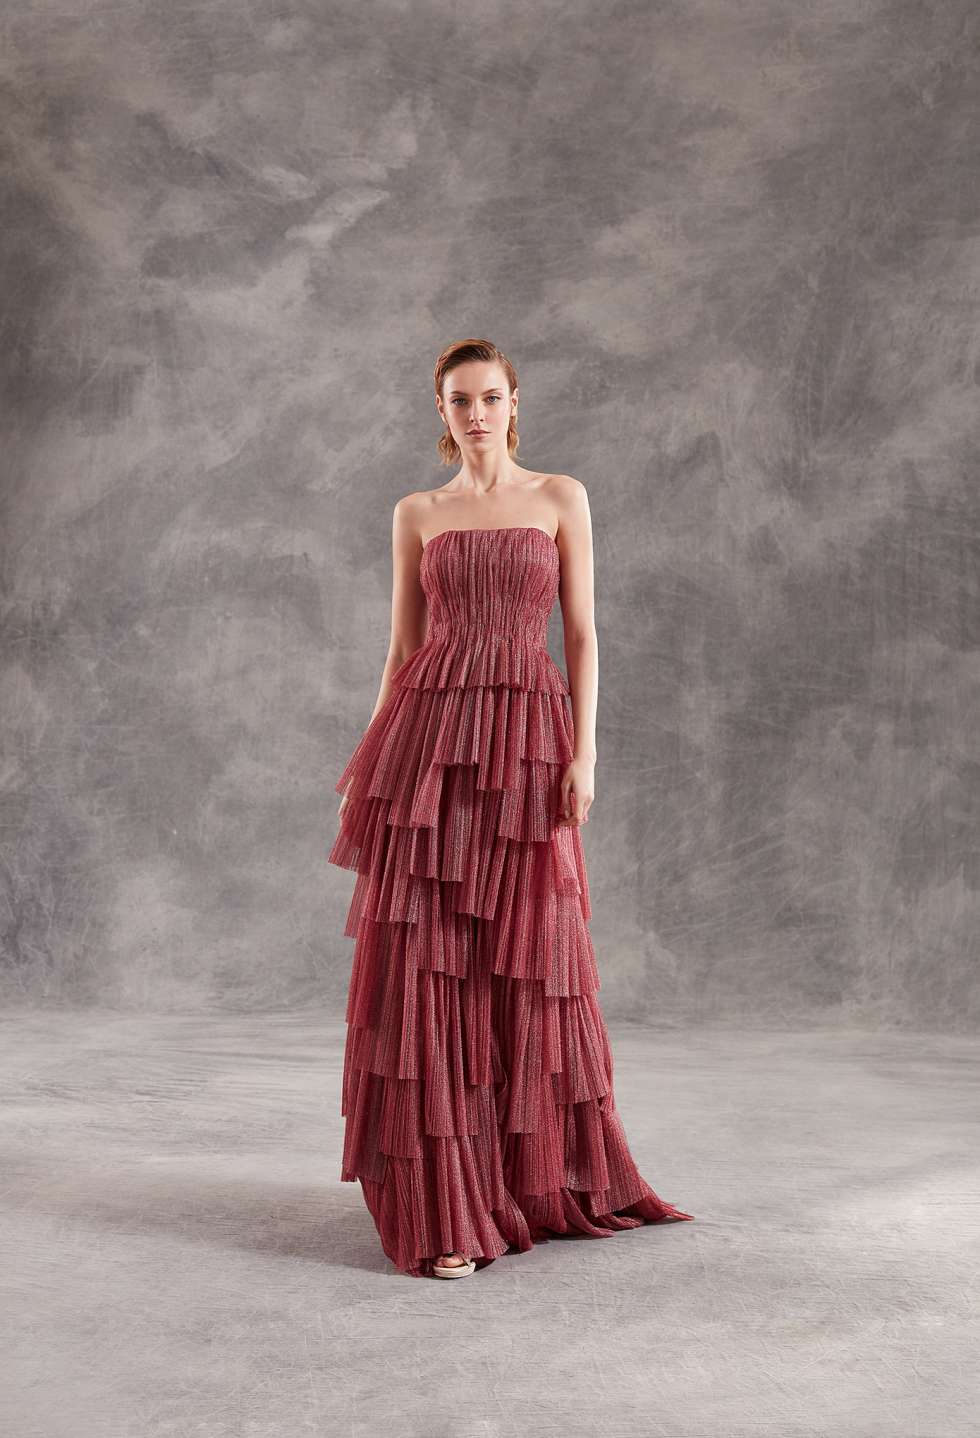 Your Engagement Dress from The Peter Langer 2020 Spring/Summer Collection